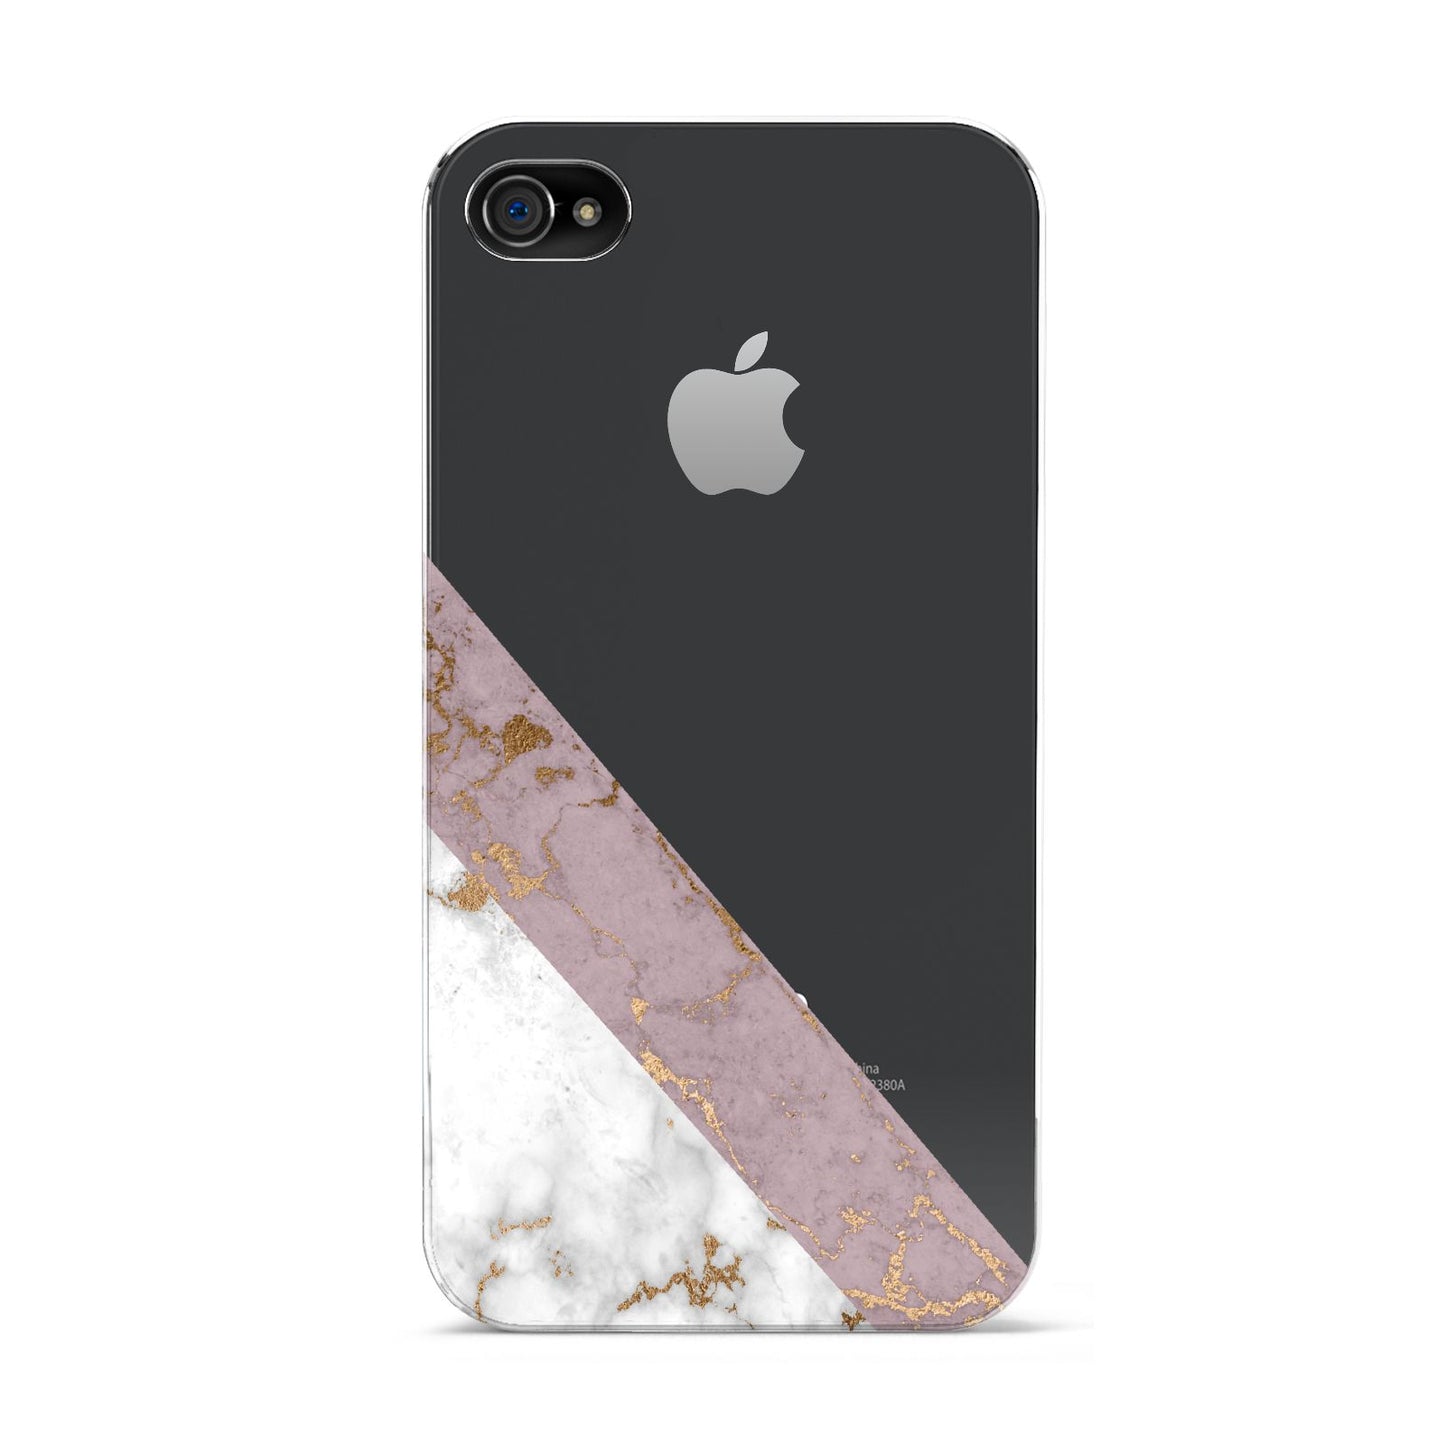 Transparent Pink and White Marble Apple iPhone 4s Case